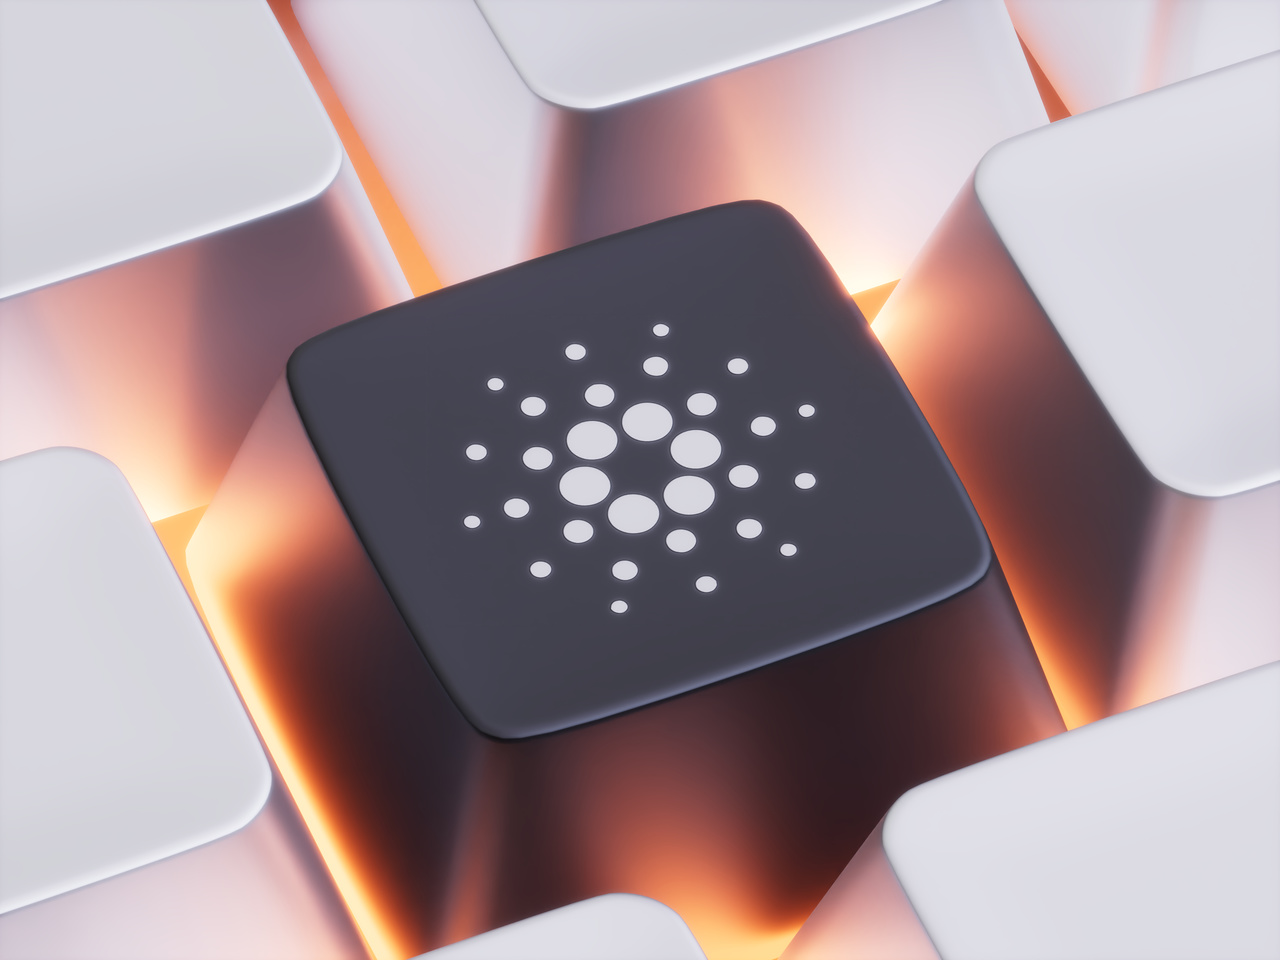 Top 3 Cardano Use Cases: 2023 is looking STRONG for ADA!